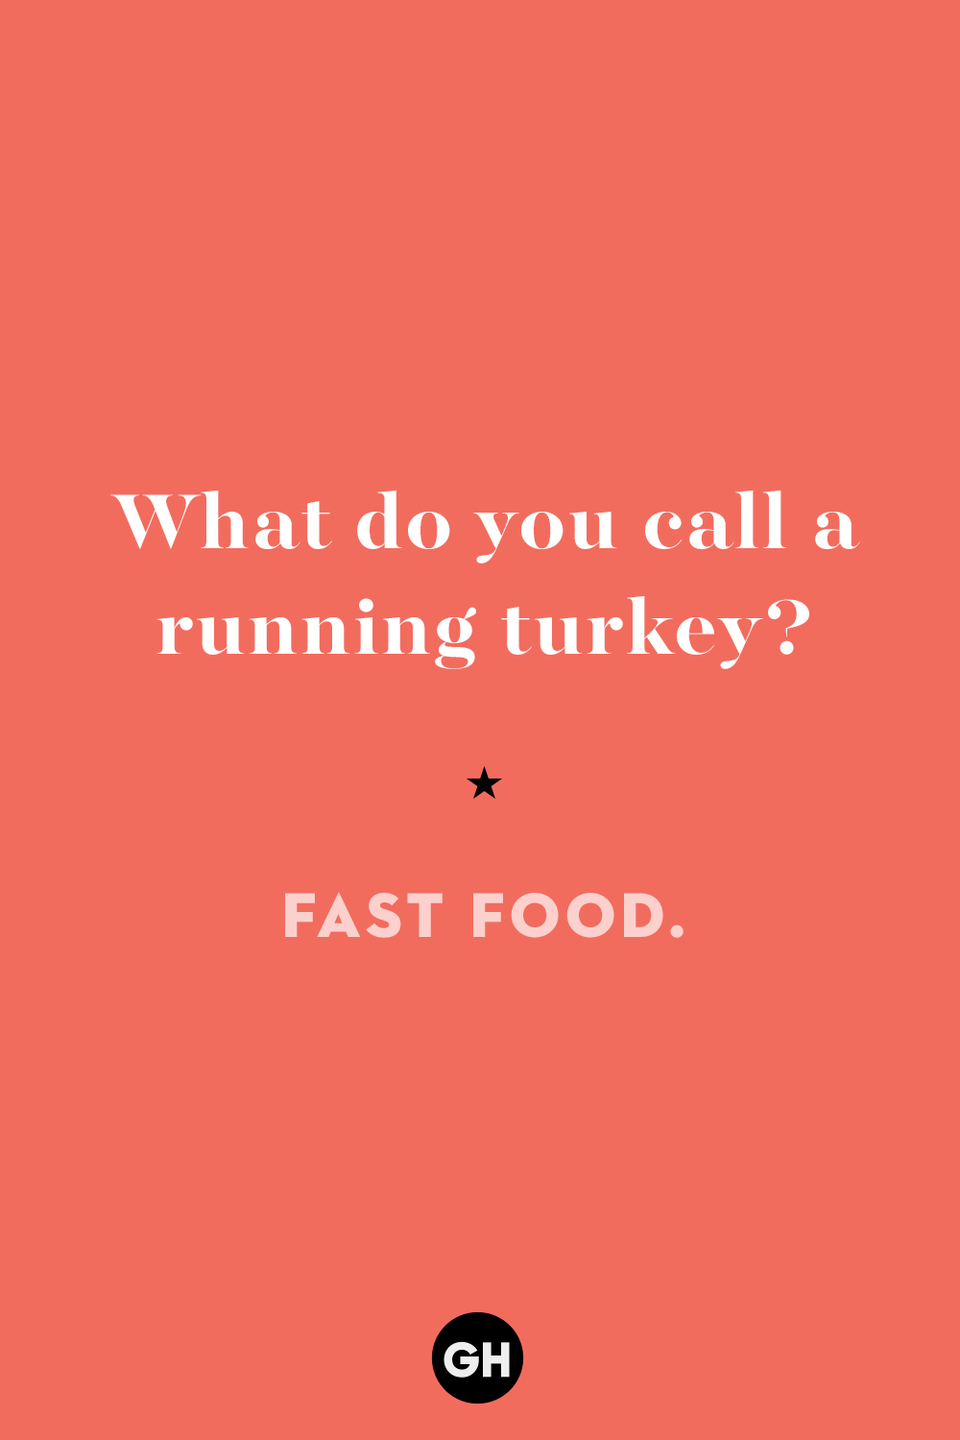 23) What do you call a running turkey?